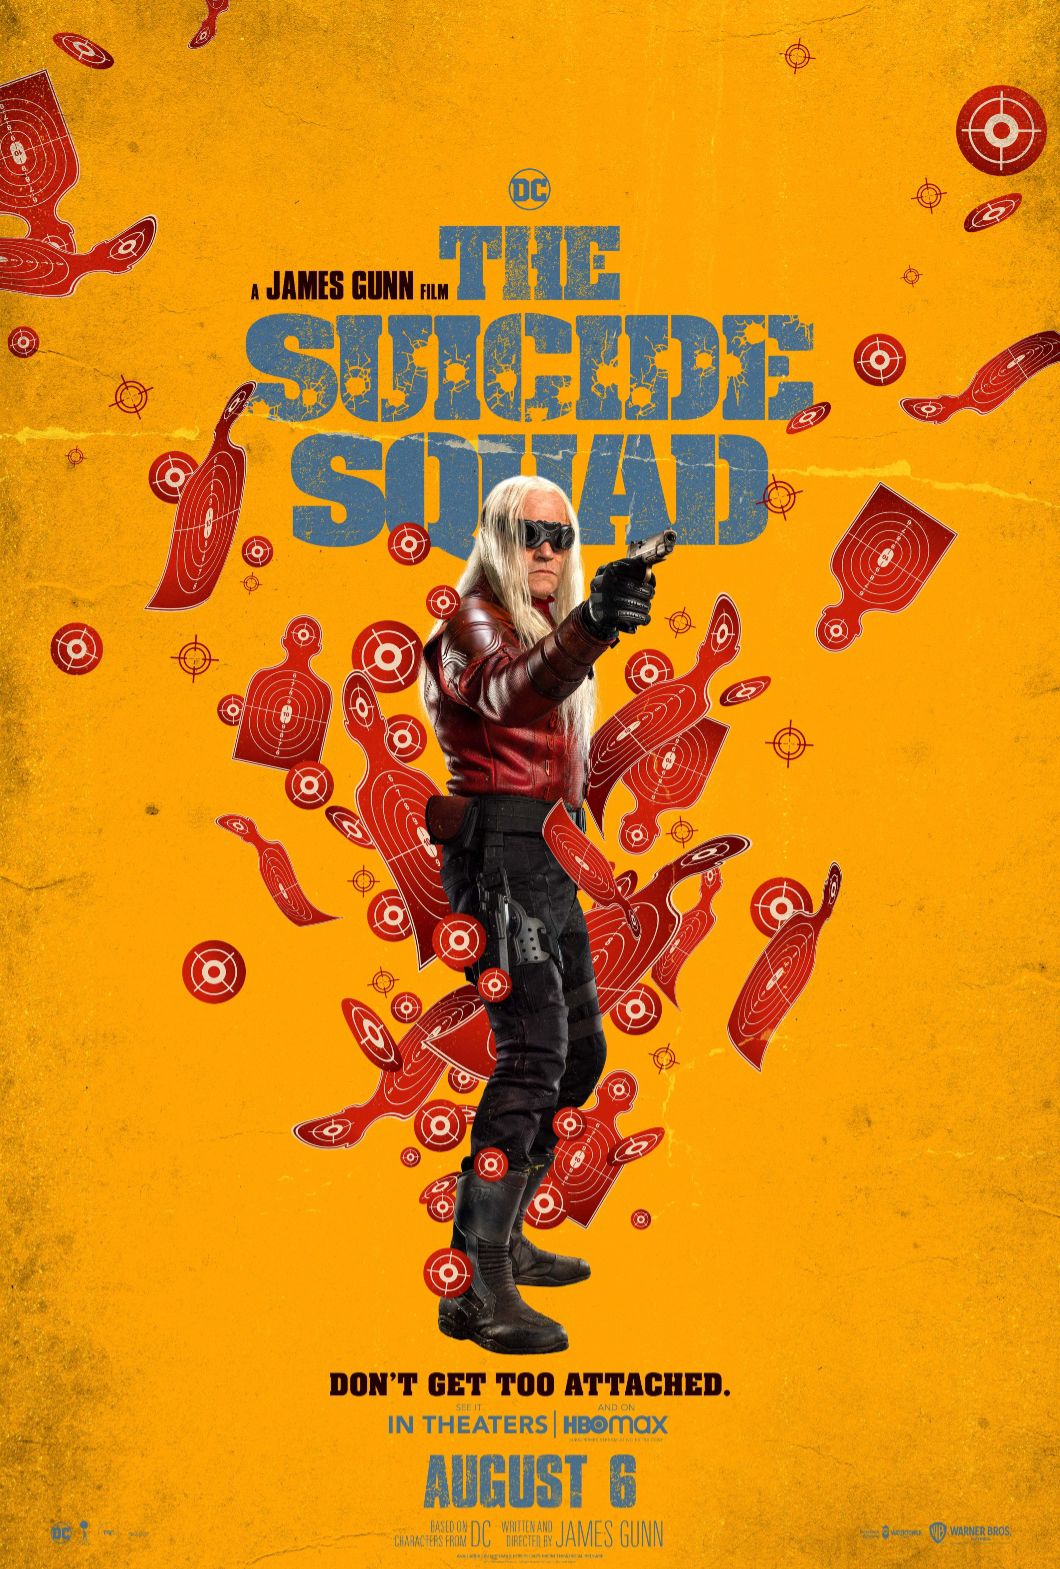 The Suicide Squad character poster #10